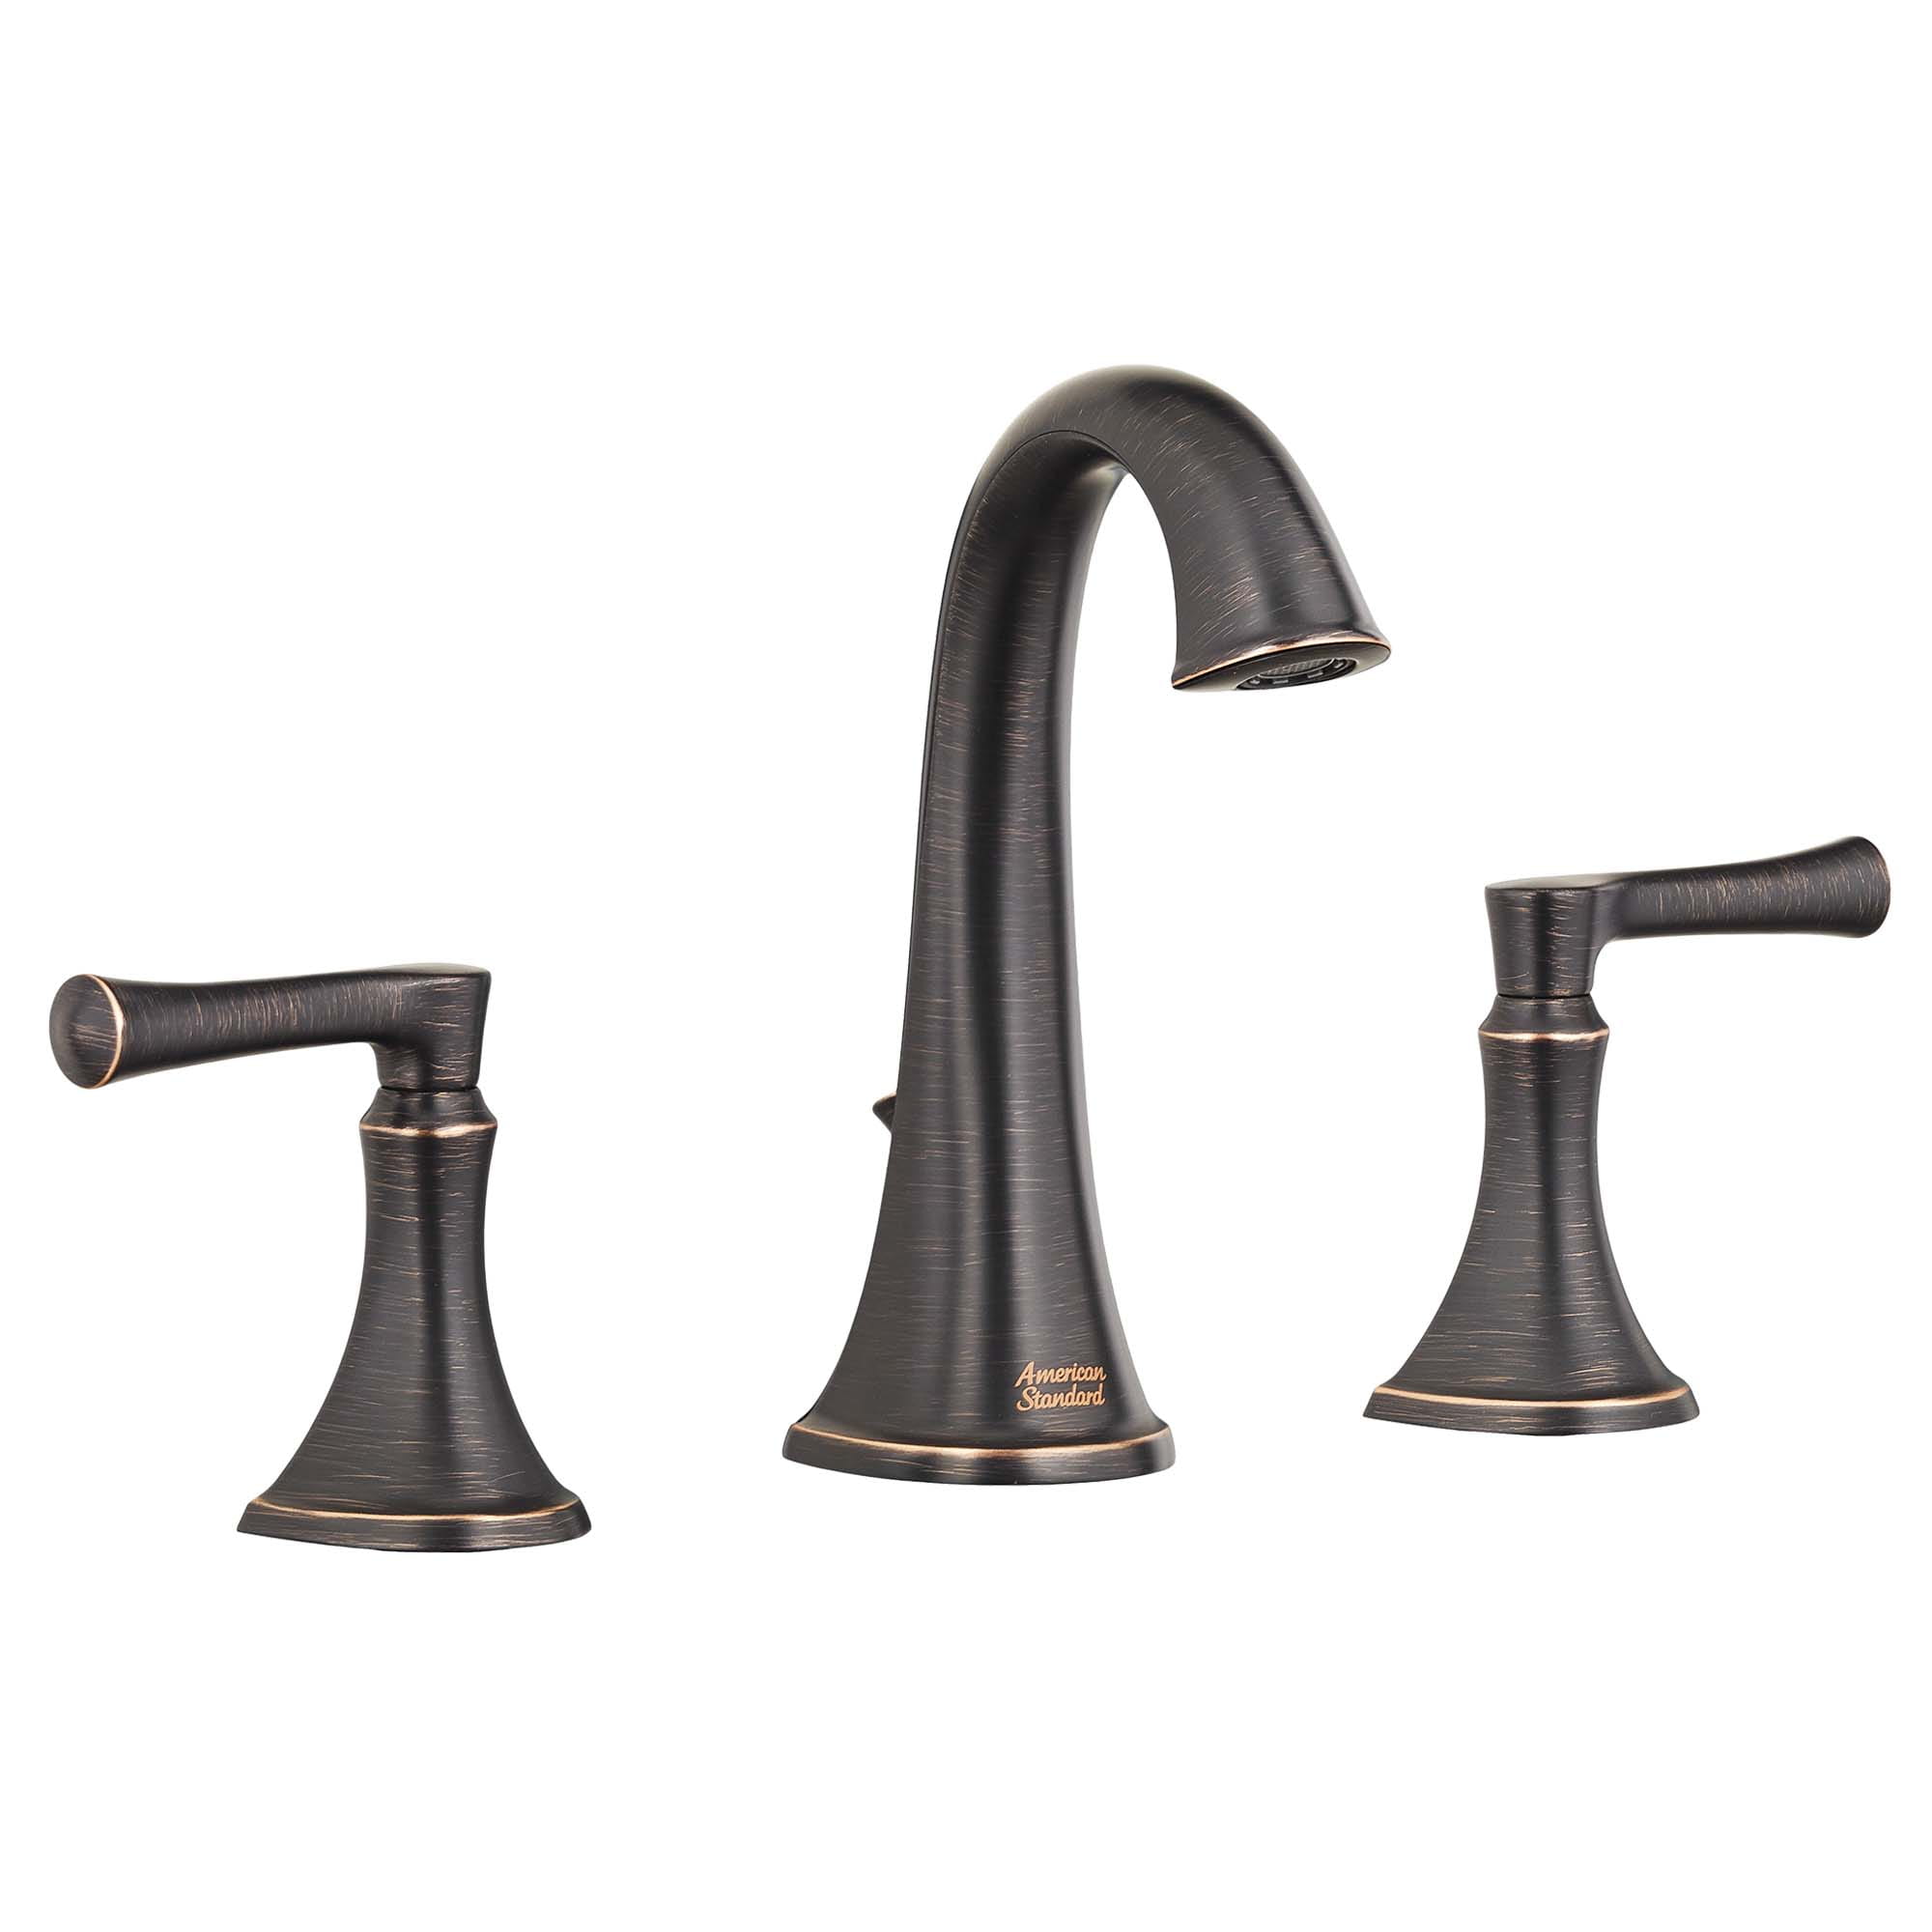 Estate 8 Inch Widespread 2 Handle Bathroom Faucet 12 gmp 45 L min With Lever Handles LEGACY BRONZE